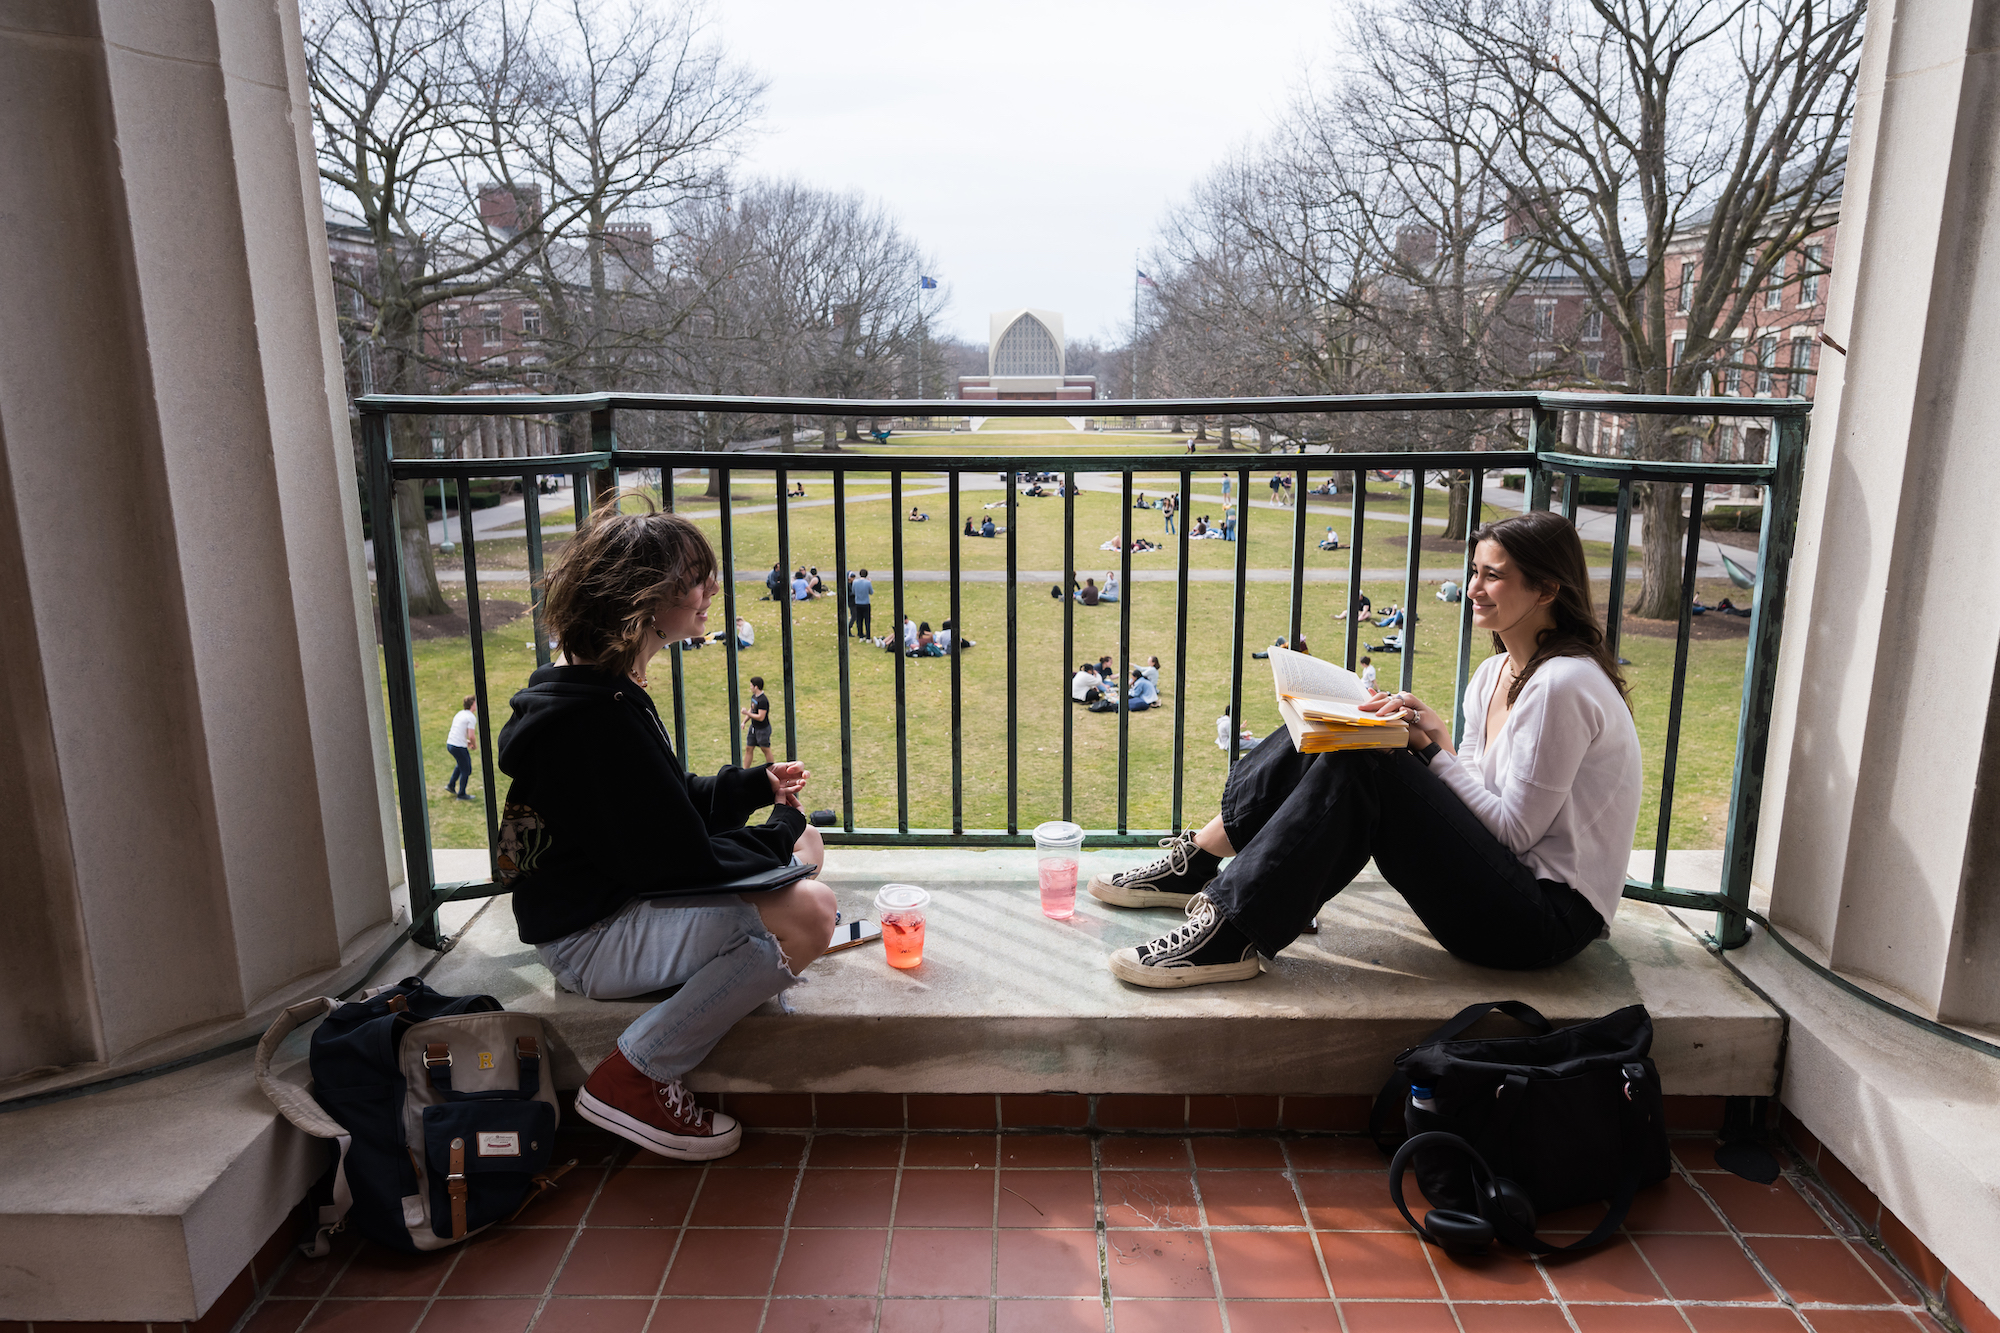 Students are seen on the Rush Rhees Library balcony overlooking University of Rochester’s Eastman Quad during a warm afternoon